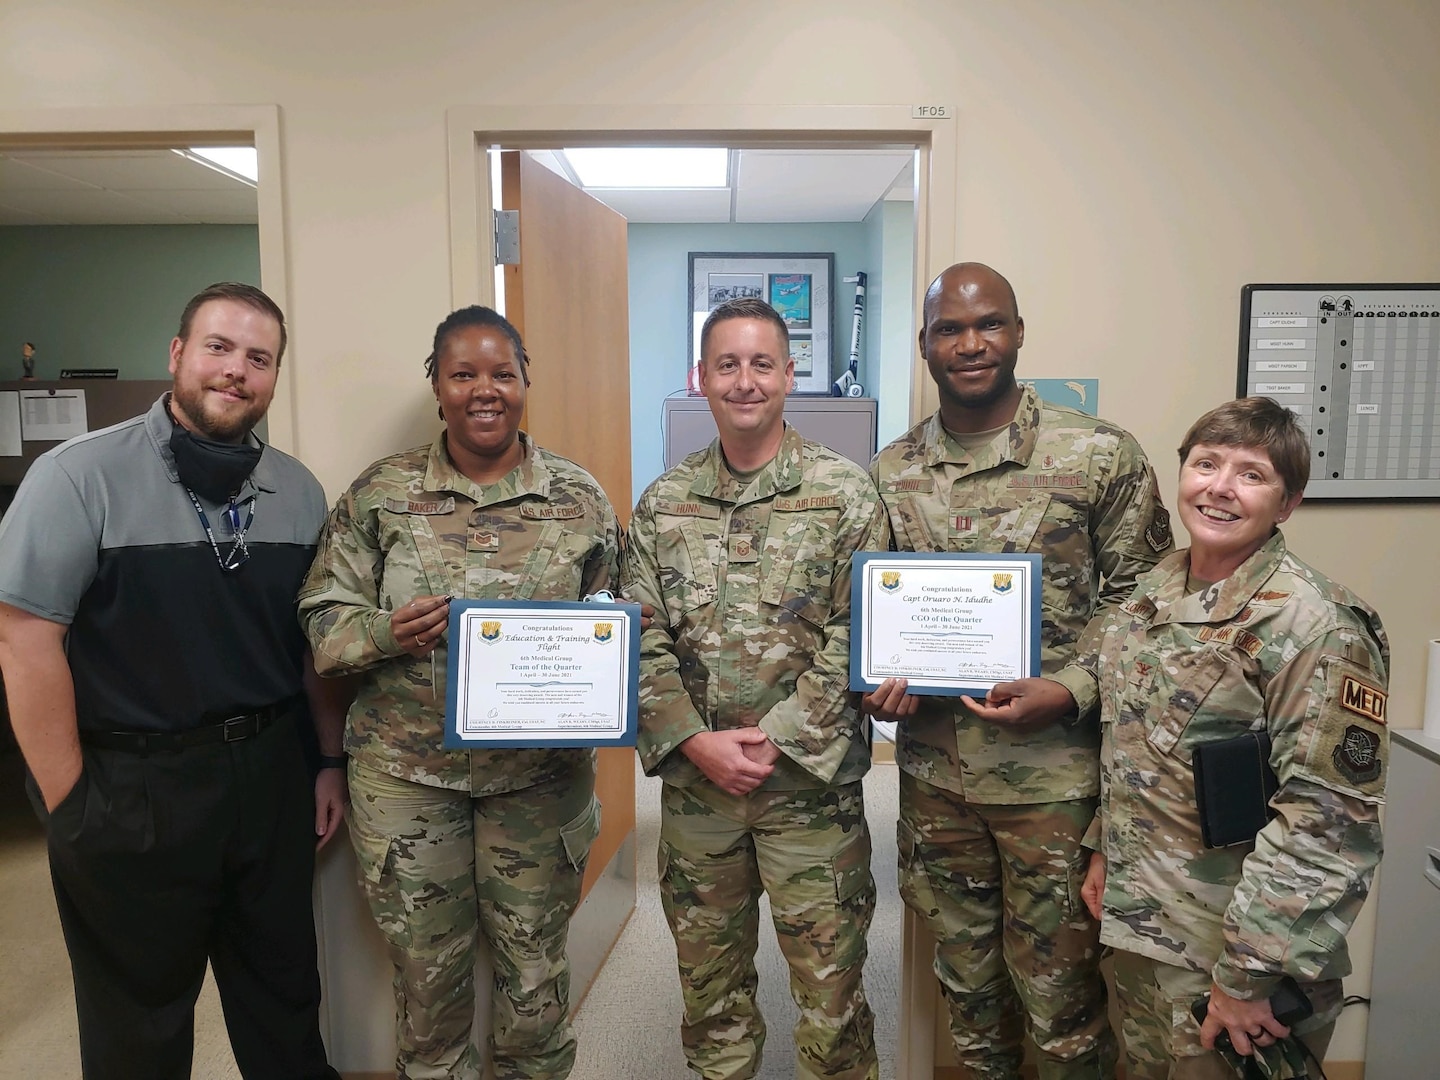 Personnel assigned to the 6th Medical Group’s Education and Training Flight, MacDill Air Force Base, Florida, pose for a group photo Aug. 3, 2021. The Education and Training Flight was presented the 6th MDG’s ‘Team of the Quarter’ for April 1 – June 30, 2021. The team pioneered a Department of Defense transition from self-aid buddy care to tactical combat casualty care and certified 12 instructors across the command. From left, Dustin Sieff, Tech Sgt. Kierra Baker, Master Sgt. Matthew Hunn, Capt. Oruaro Idudhe and Col. Cheryl Lockhart (Not pictured: James Norbech and Richard Cook). (Courtesy photo)